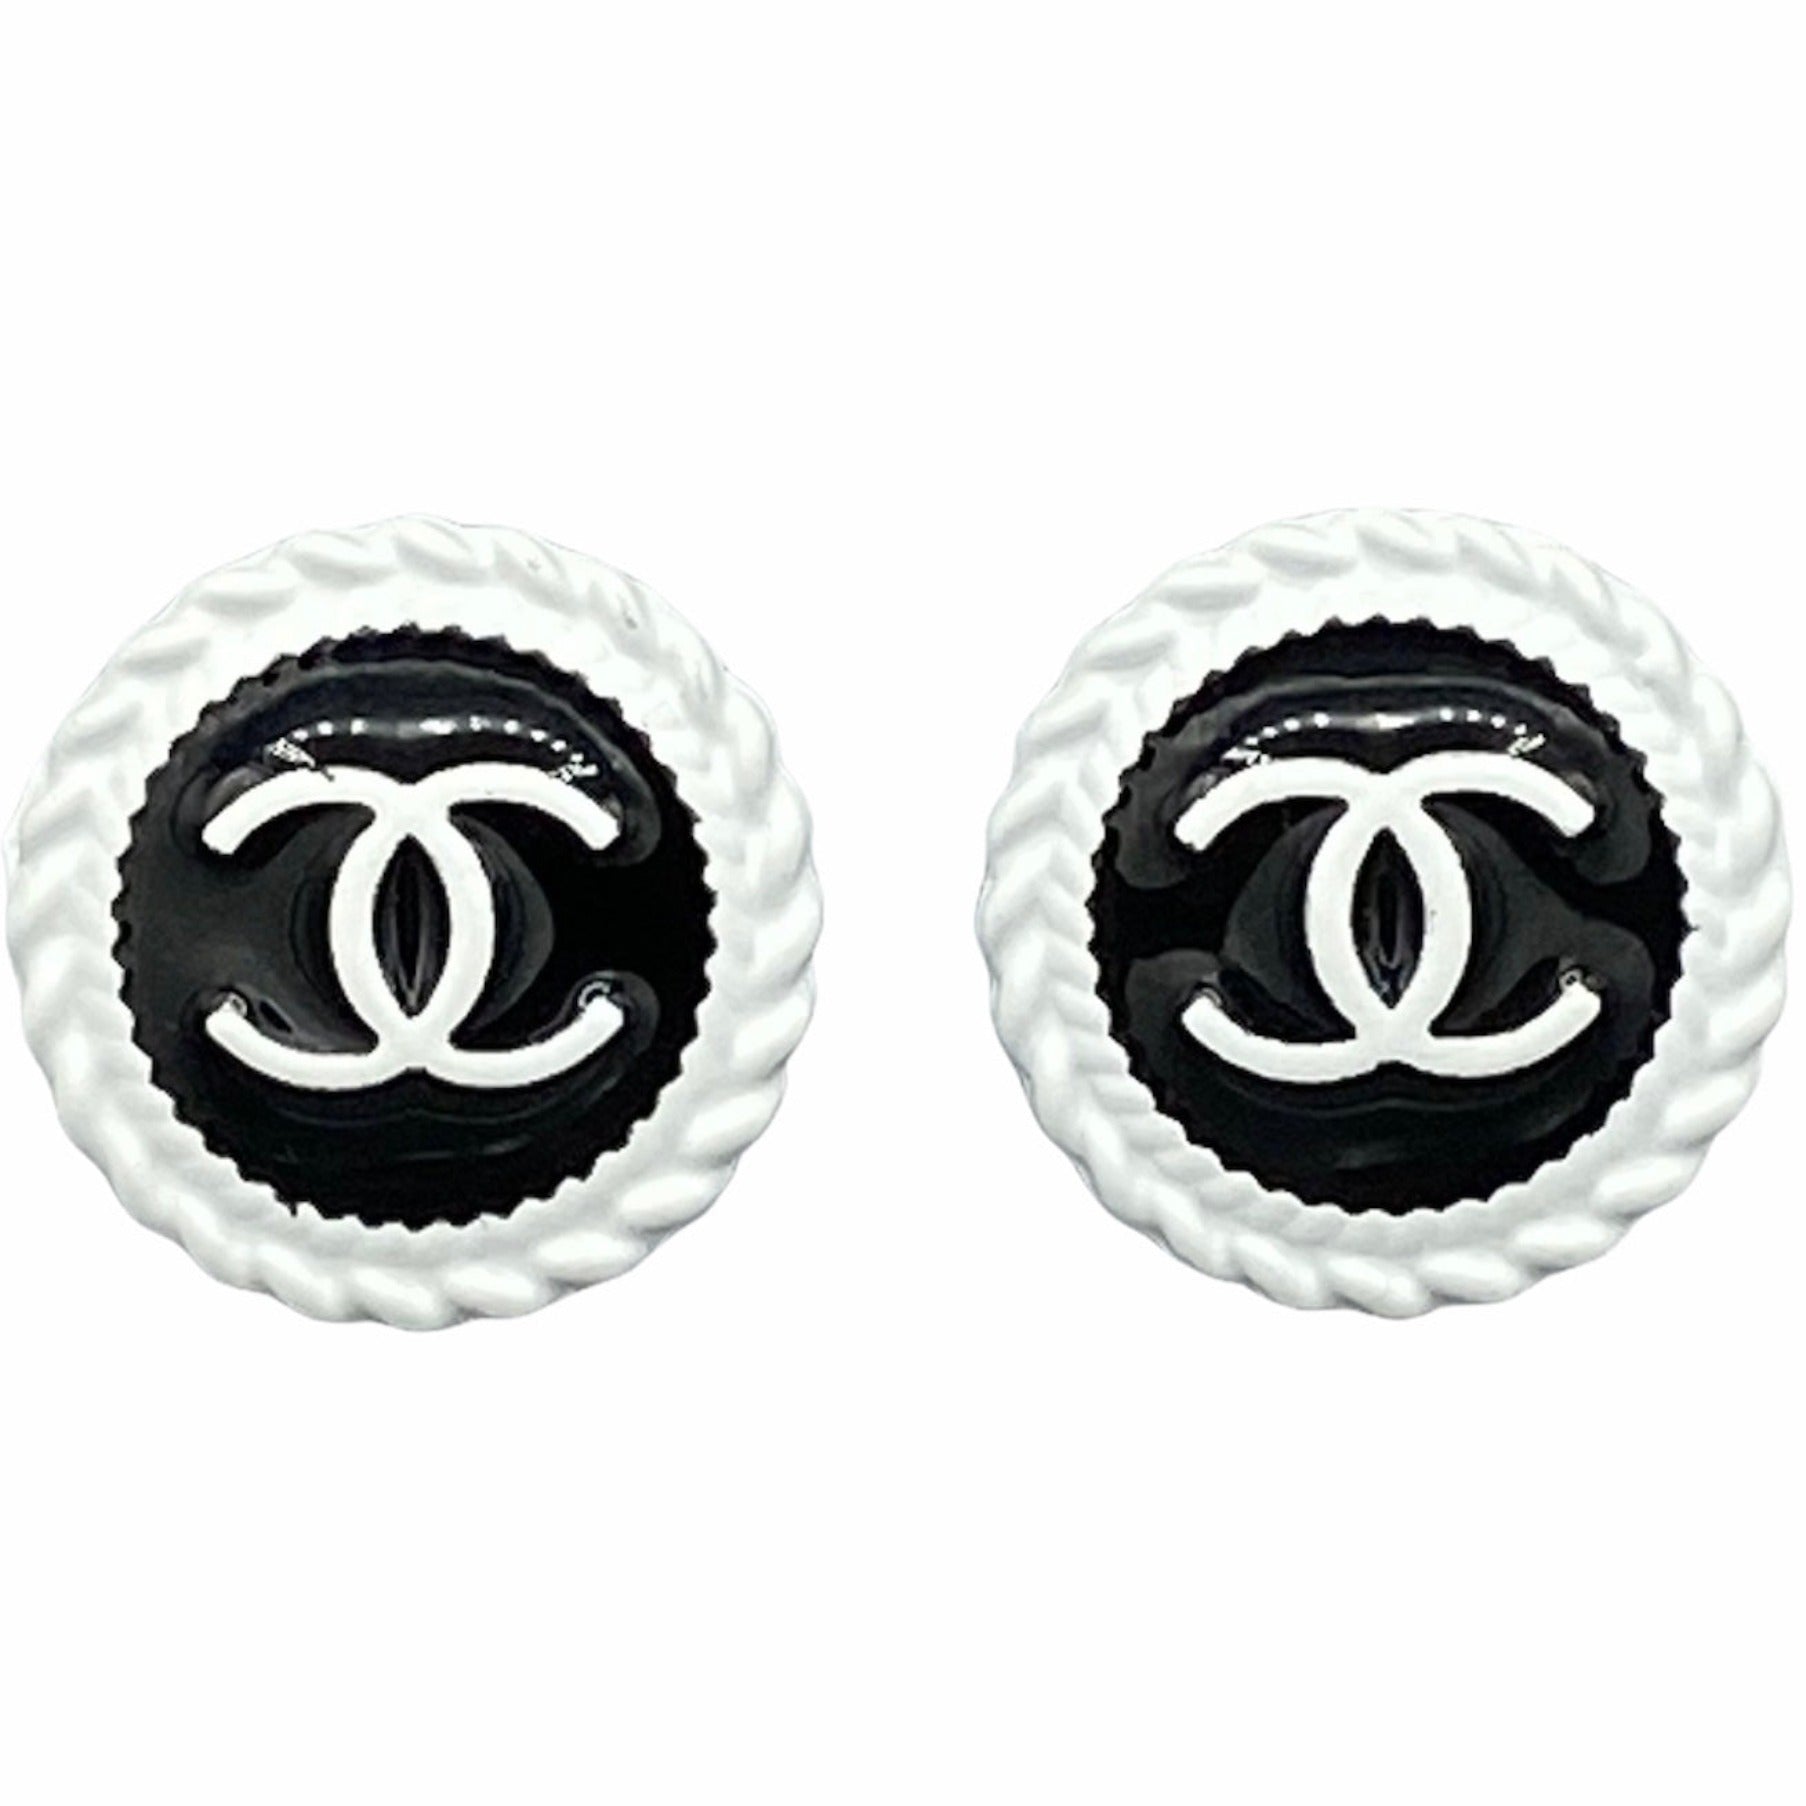 Rope Button Earrings - Black/White